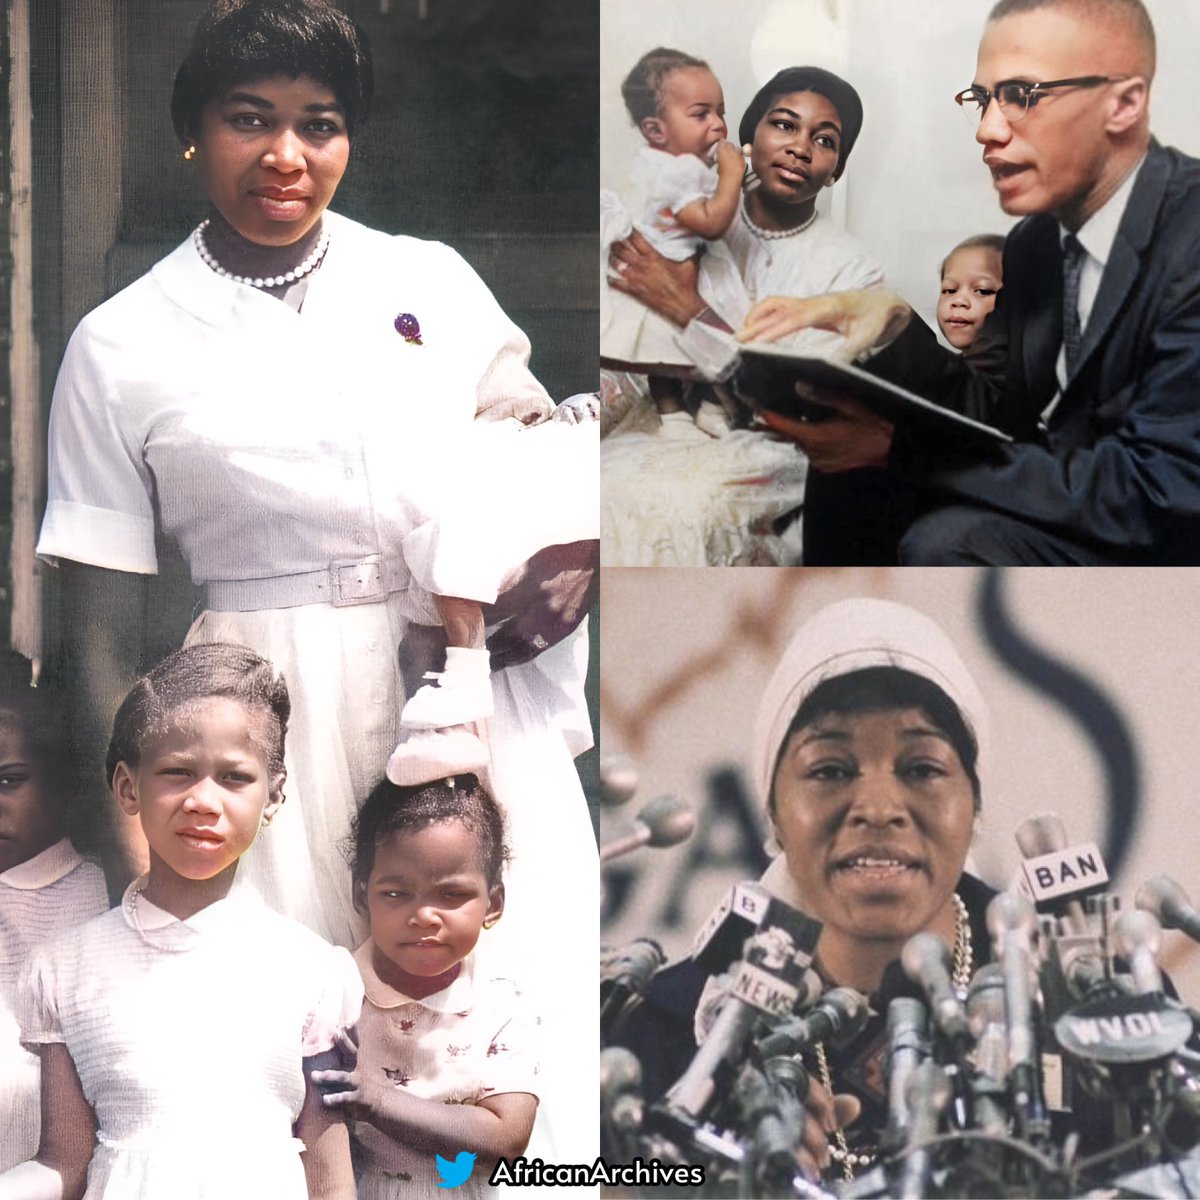 June 23, 1997 — Malcolm X's widow Betty Shabazz passed away today 🕊️

Born Betty Dean Sanders, she was an educator, civil rights advocate and the wife of Malcolm X. 

Dr. Shabazz grew up in Detroit, Michigan, where her foster parents largely sheltered her from racism. She…